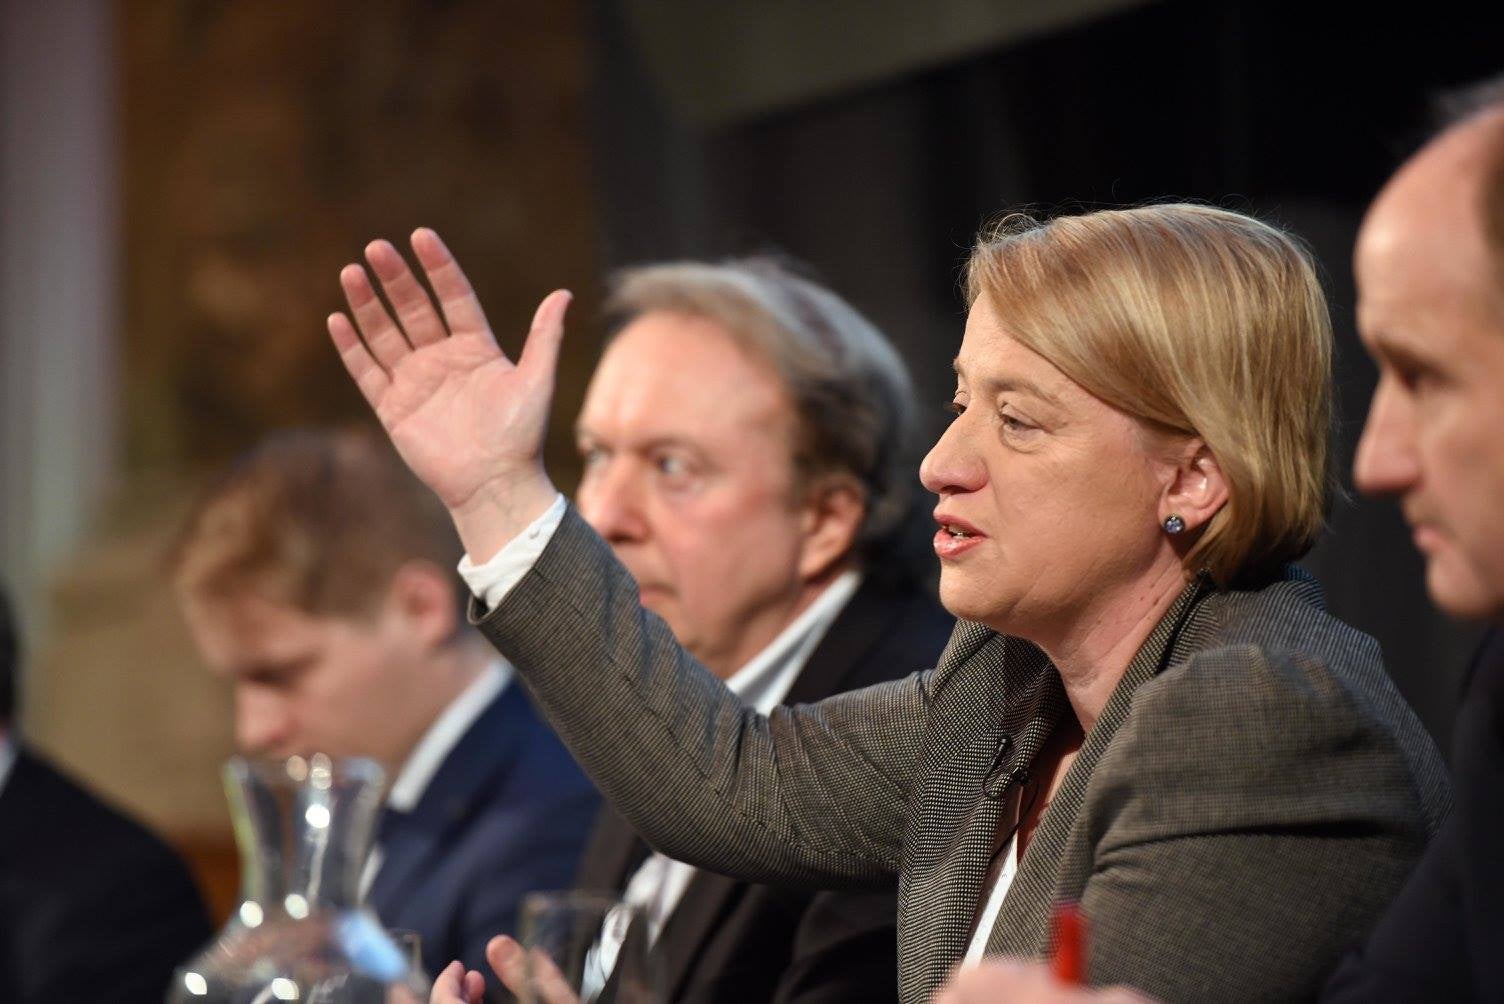 &#13;
Leader of the Green Party, Natalie Bennett, emerged as one of the night's firm favourites &#13;